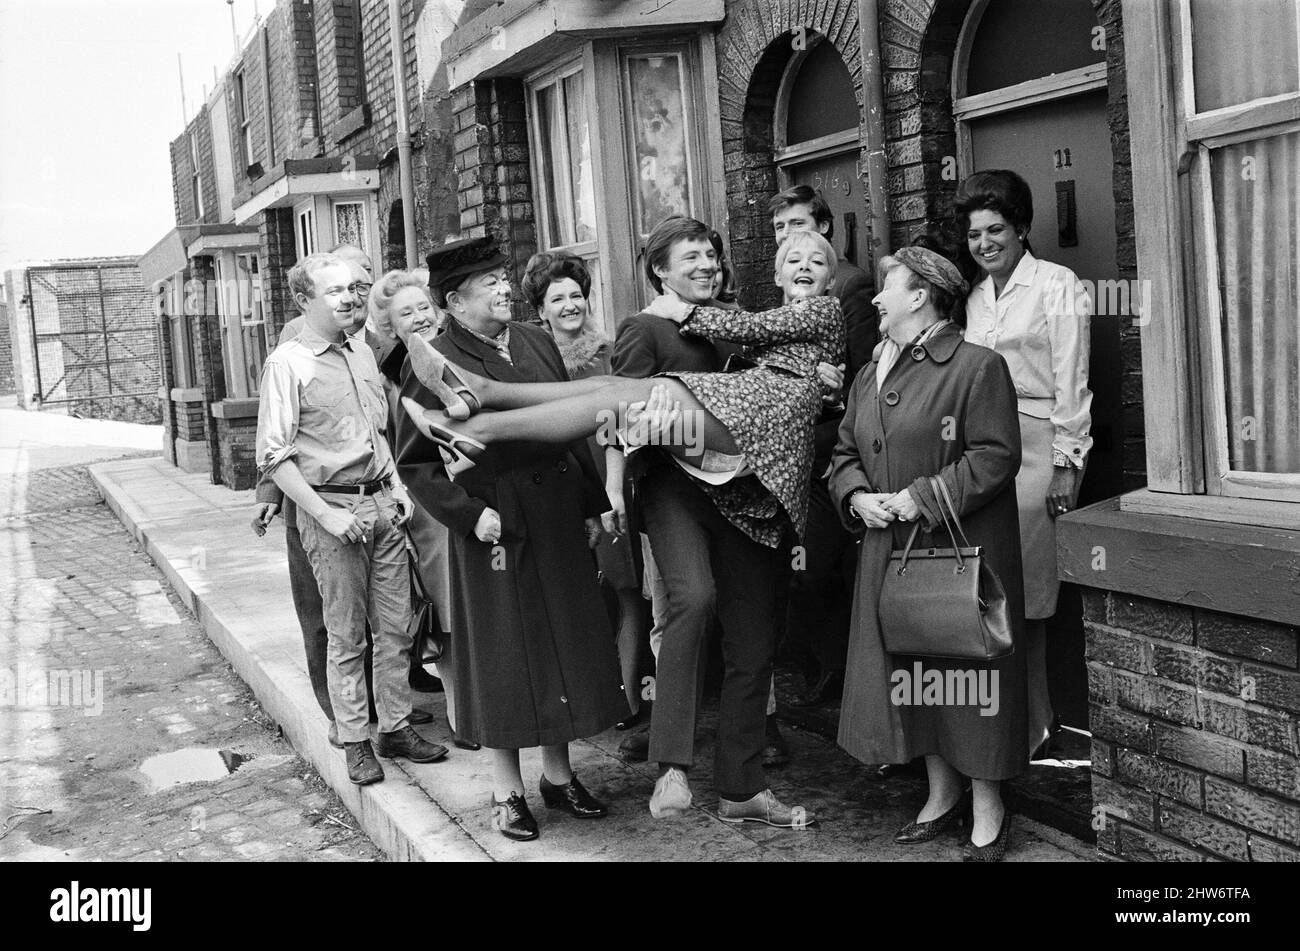 A new street setting for 'Coronation Street'. Granada TV have built an outdoor set for shooting some of the scenes. Pictured are cast members:  Cast member Dennis Tanner (Philip Lowrie) with his bride Jenny Sutton (Mitzi Rogers) after their wedding with Annie Walker (Doris Speed), Ena Sharples (Violet Carson), Emily Nugent (Eileen Derbyshire), Ken Barlow (William Roache) and Elsie Tanner (Pat Phoenix). 18th May 1968. Stock Photo